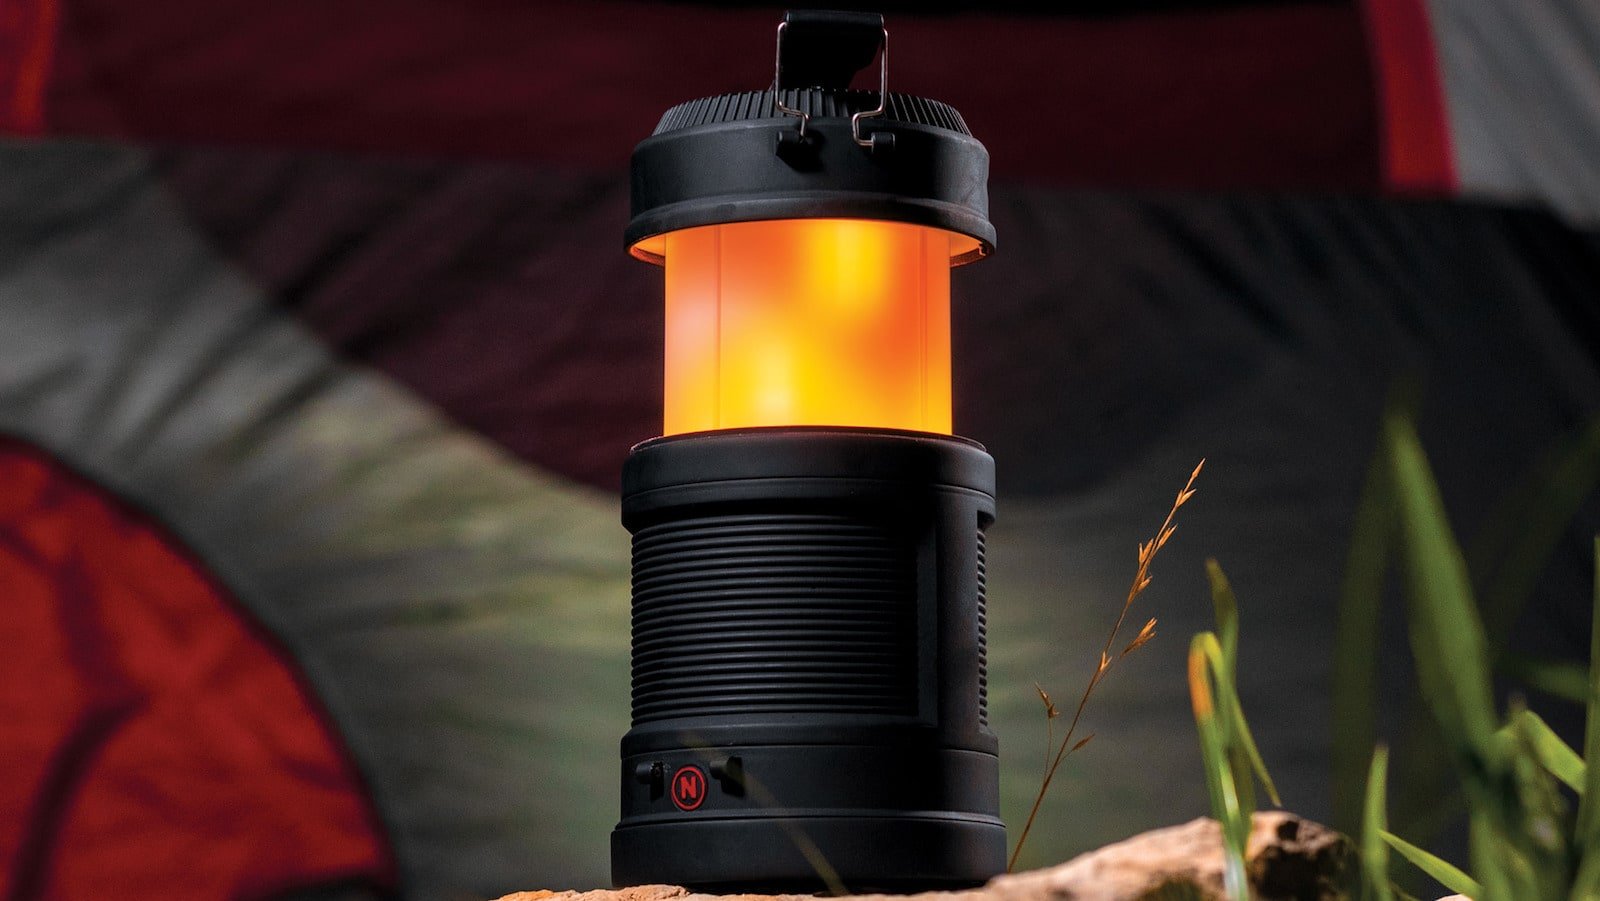 NEBO BIG POPPY rechargeable flashlight features a power bank for USB-powered devices